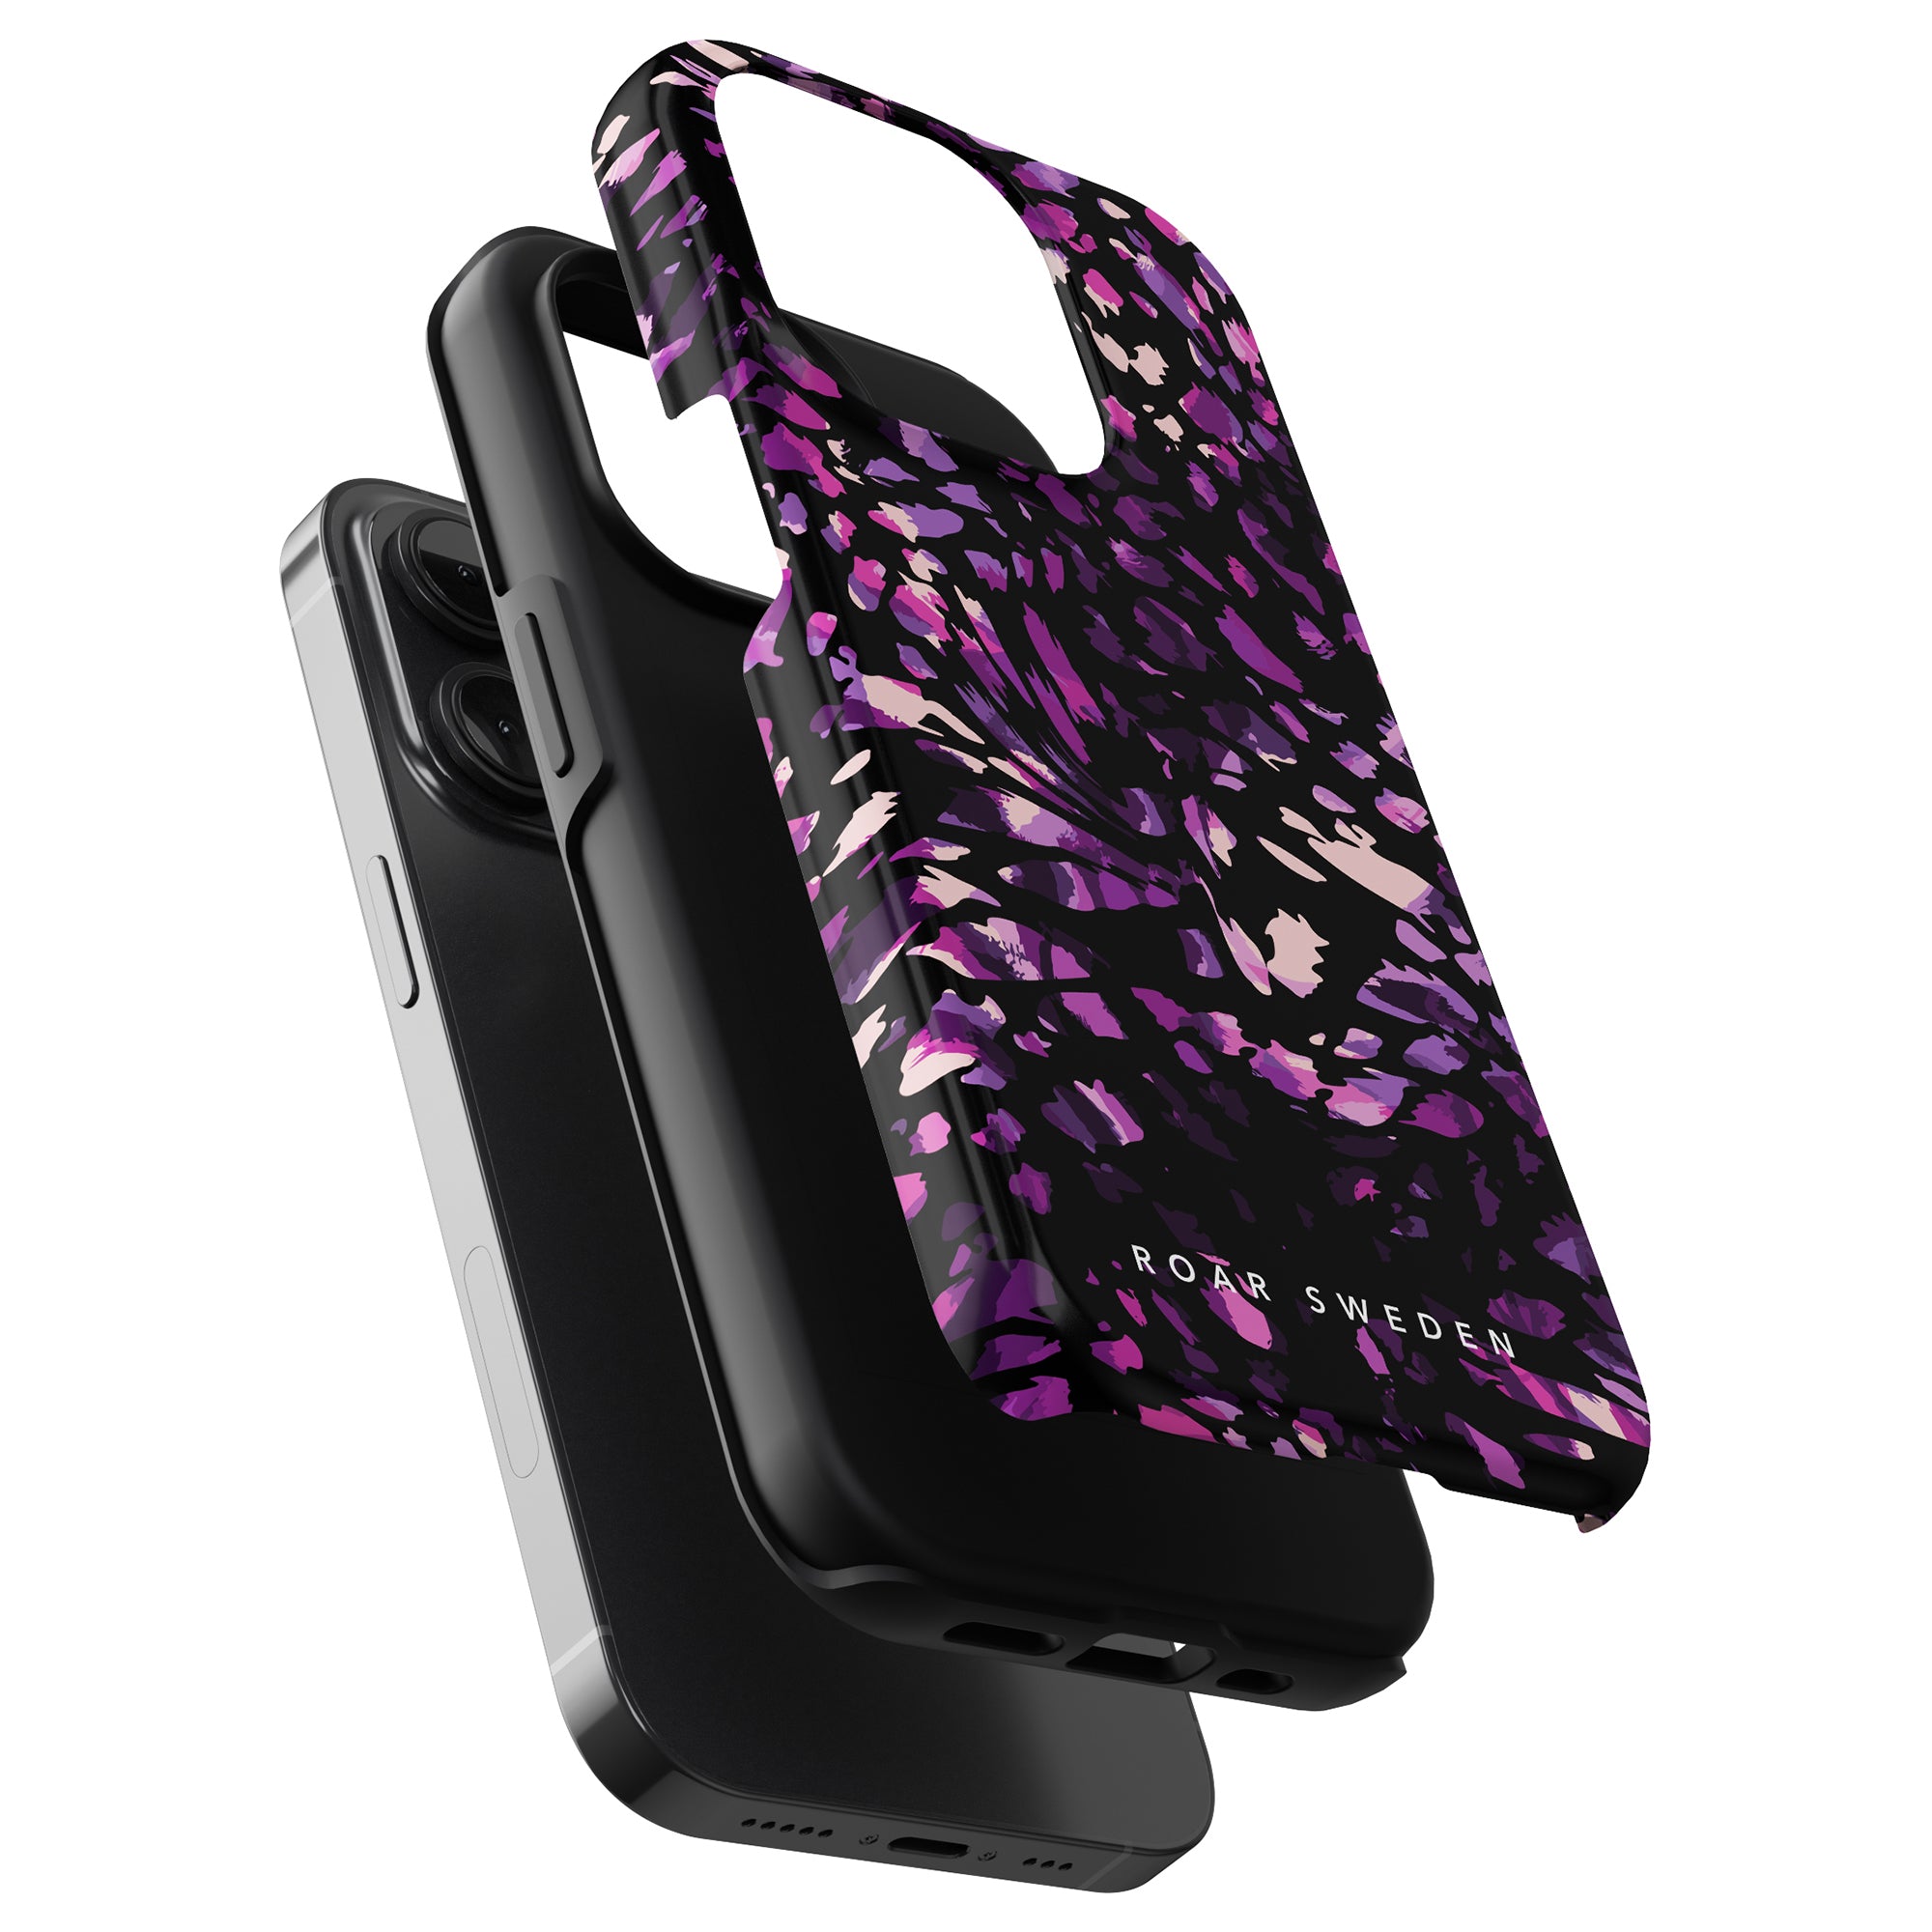 A Purple Spots - Tough Case with a black and purple abstract pattern is shown in three stages: fully assembled, separated front cover, and back cover, with the phone inside. This case offers both a stilsäker look and excellent smartphone skydd.